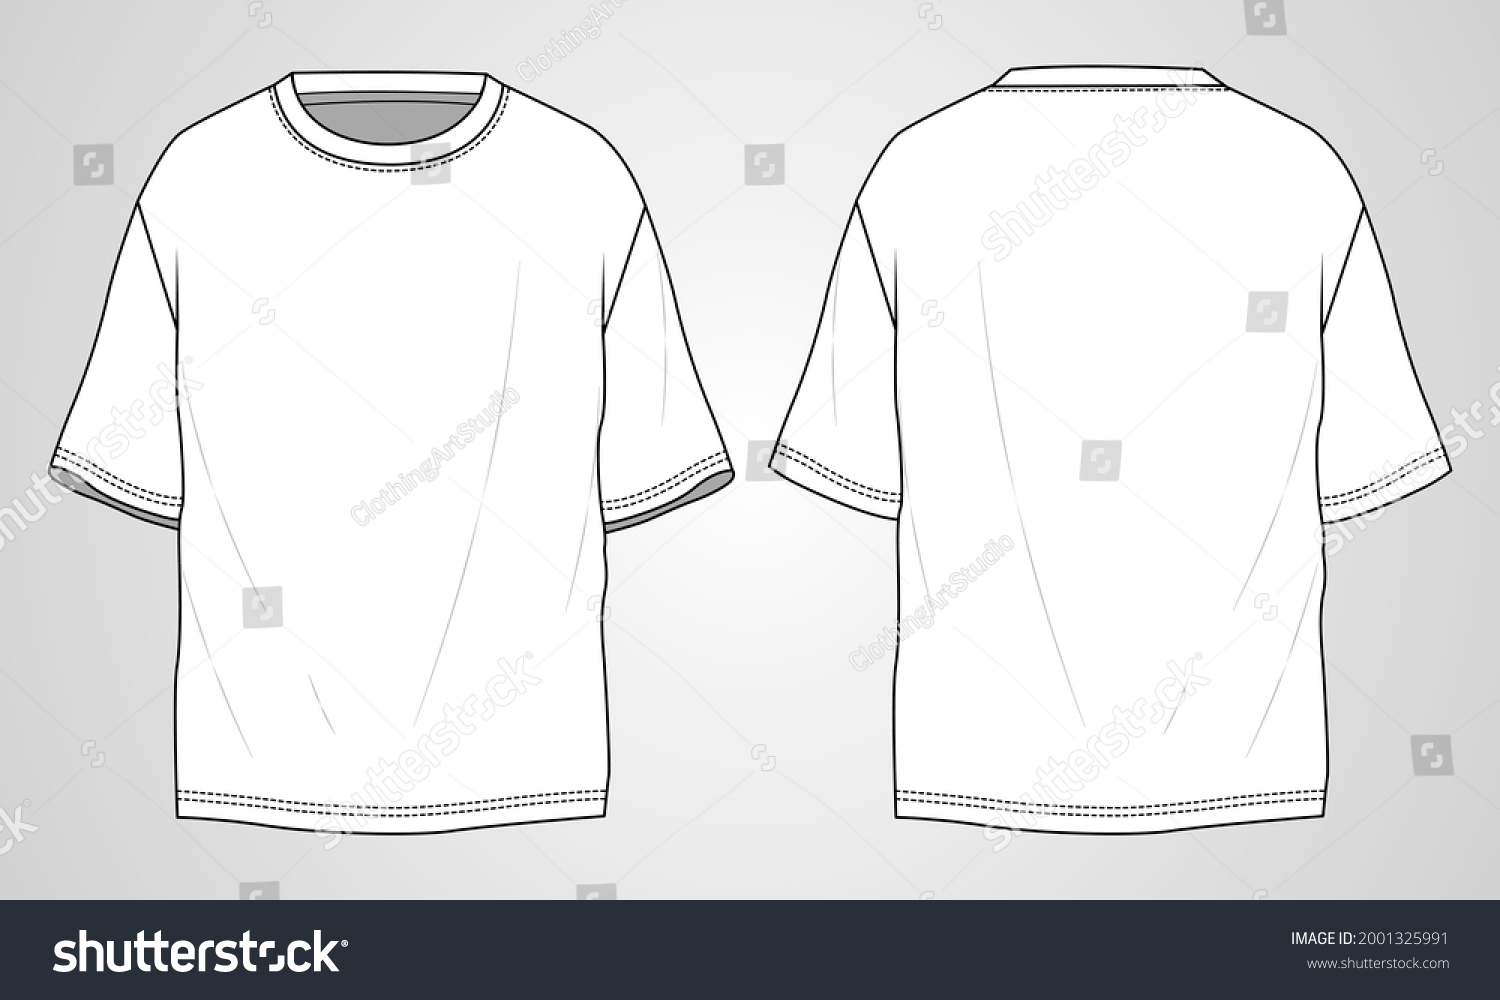 T-shirt technical Sketch fashion Flat Template With Round neckline, elbow sleeves, oversized, tunic length Cotton jersey. Vector illustration basic apparel design. easy editable and customizable. #2001325991